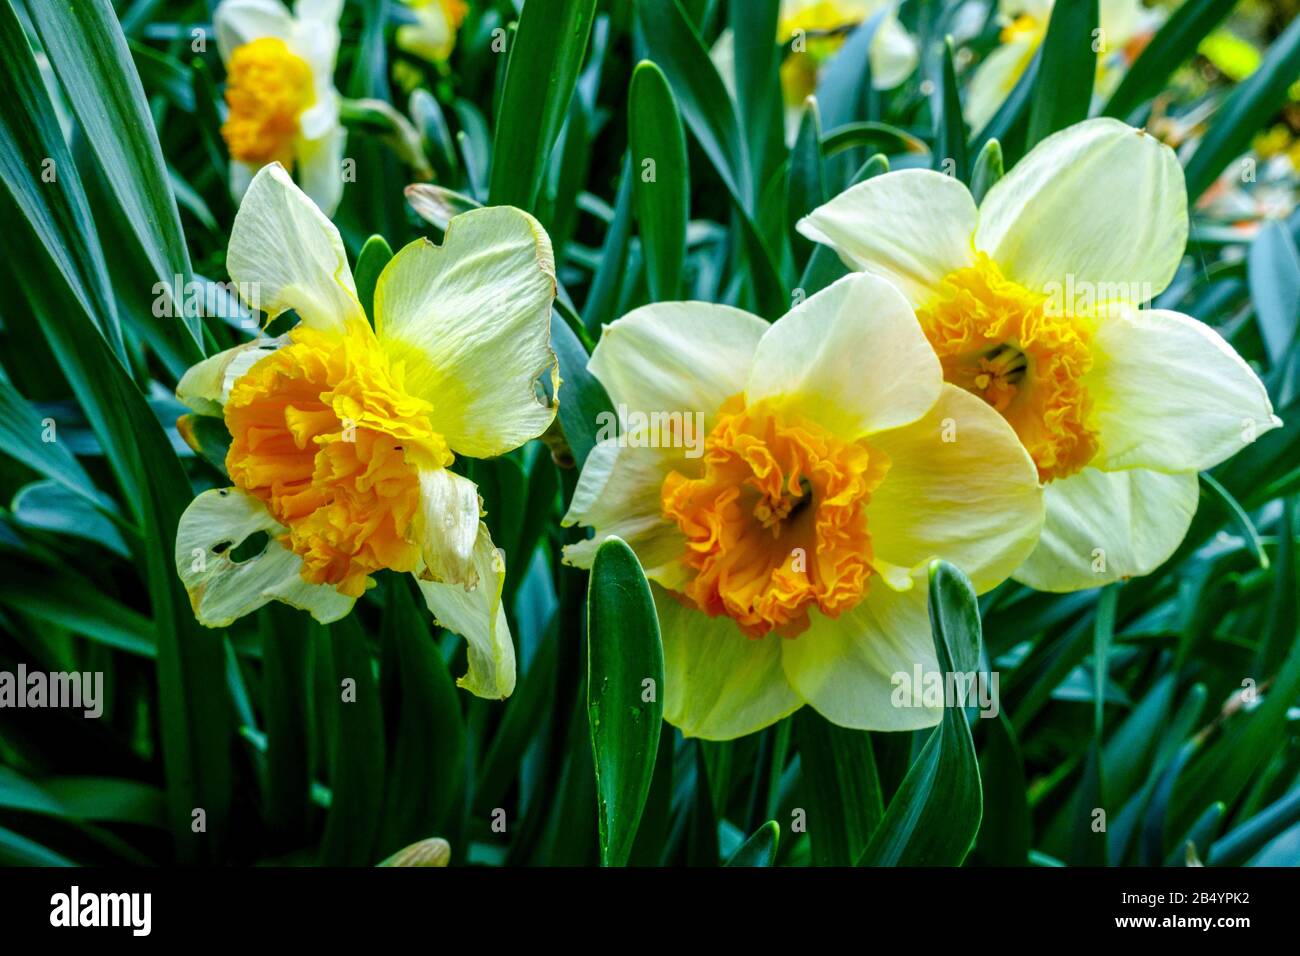 Daffodil Narcissus 'Bully' spring flowers garden plant Stock Photo